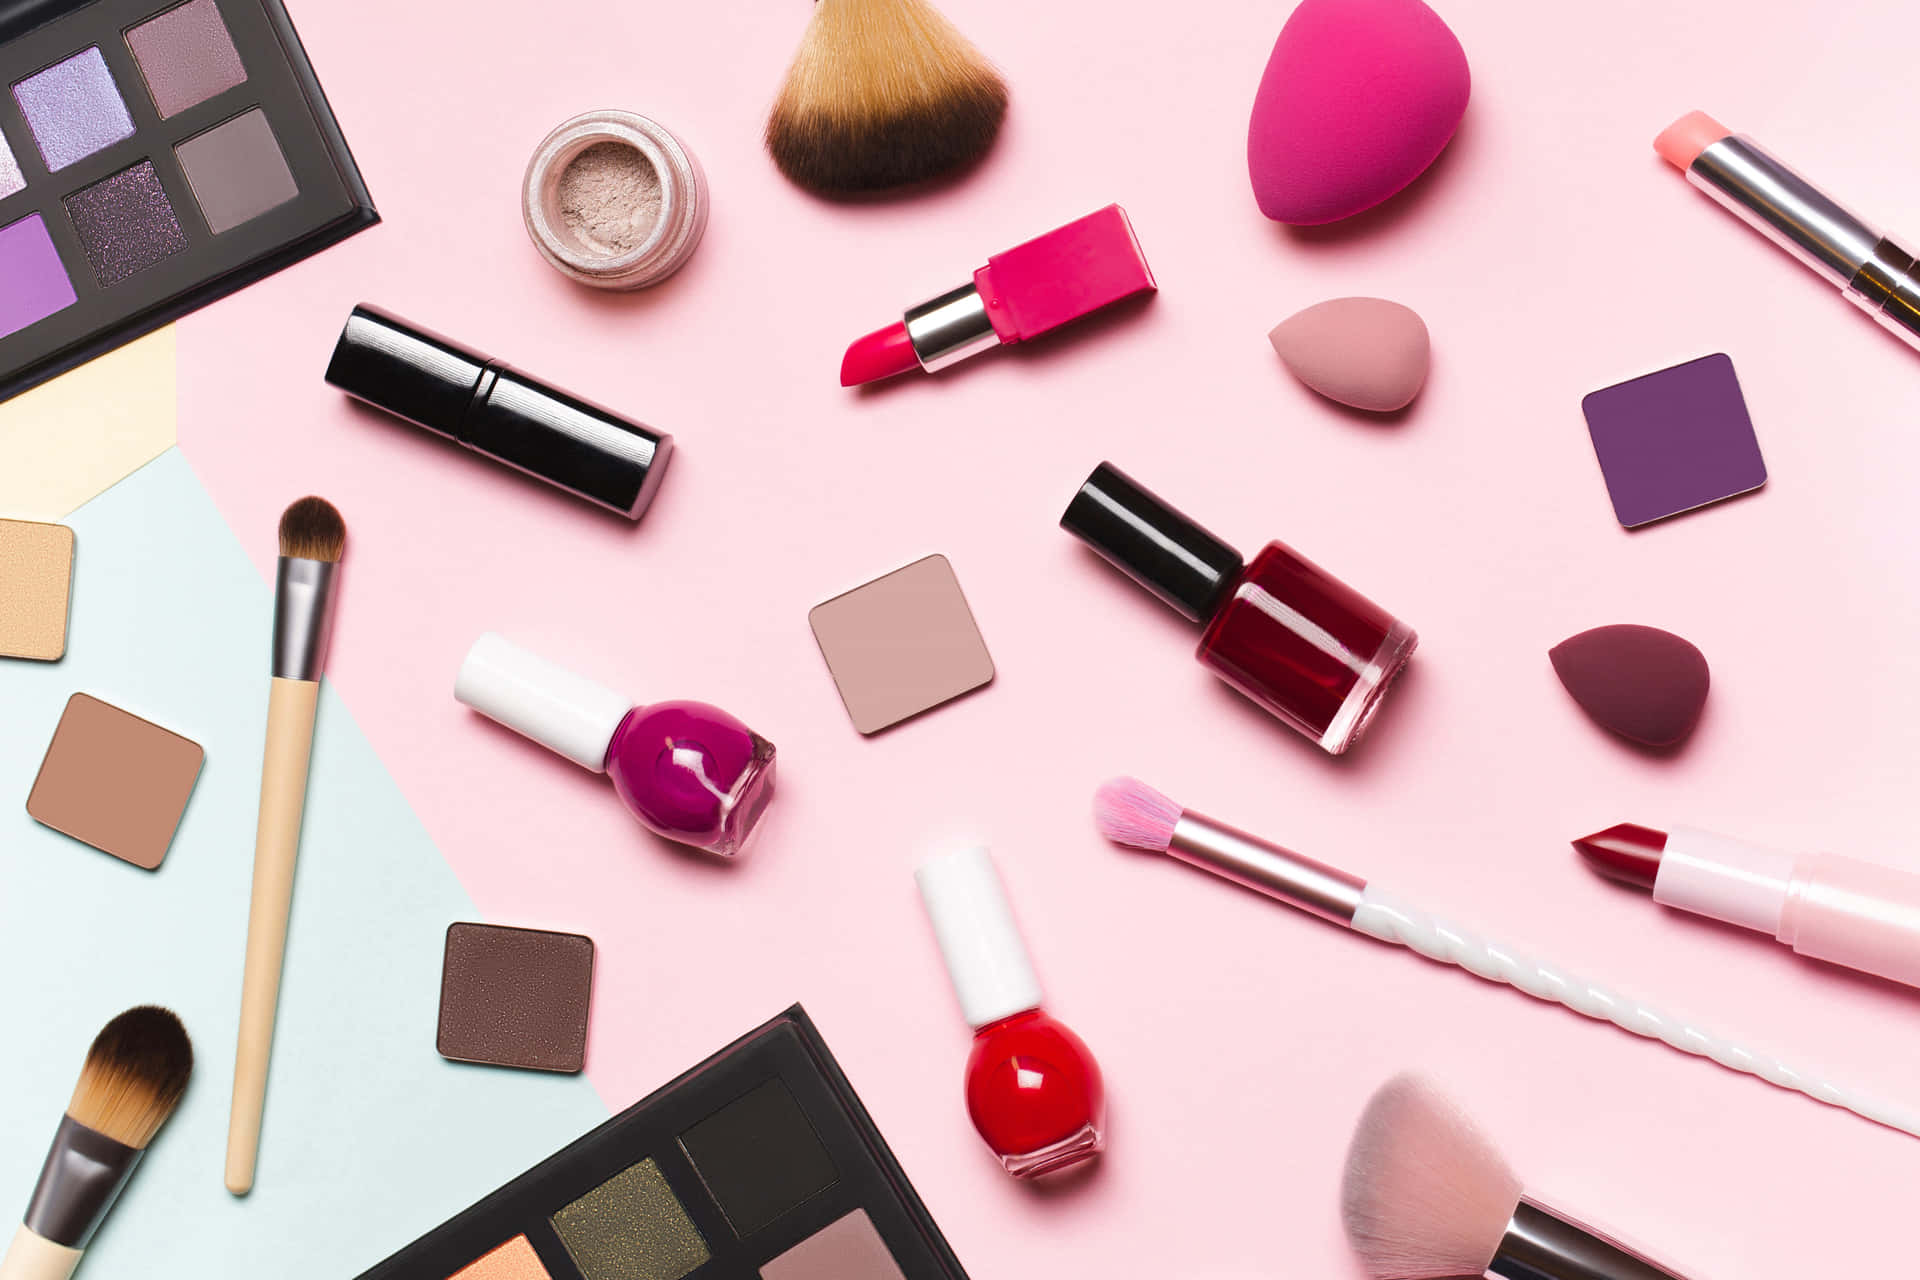 Cosmetics And Makeup Products On A Pink Background